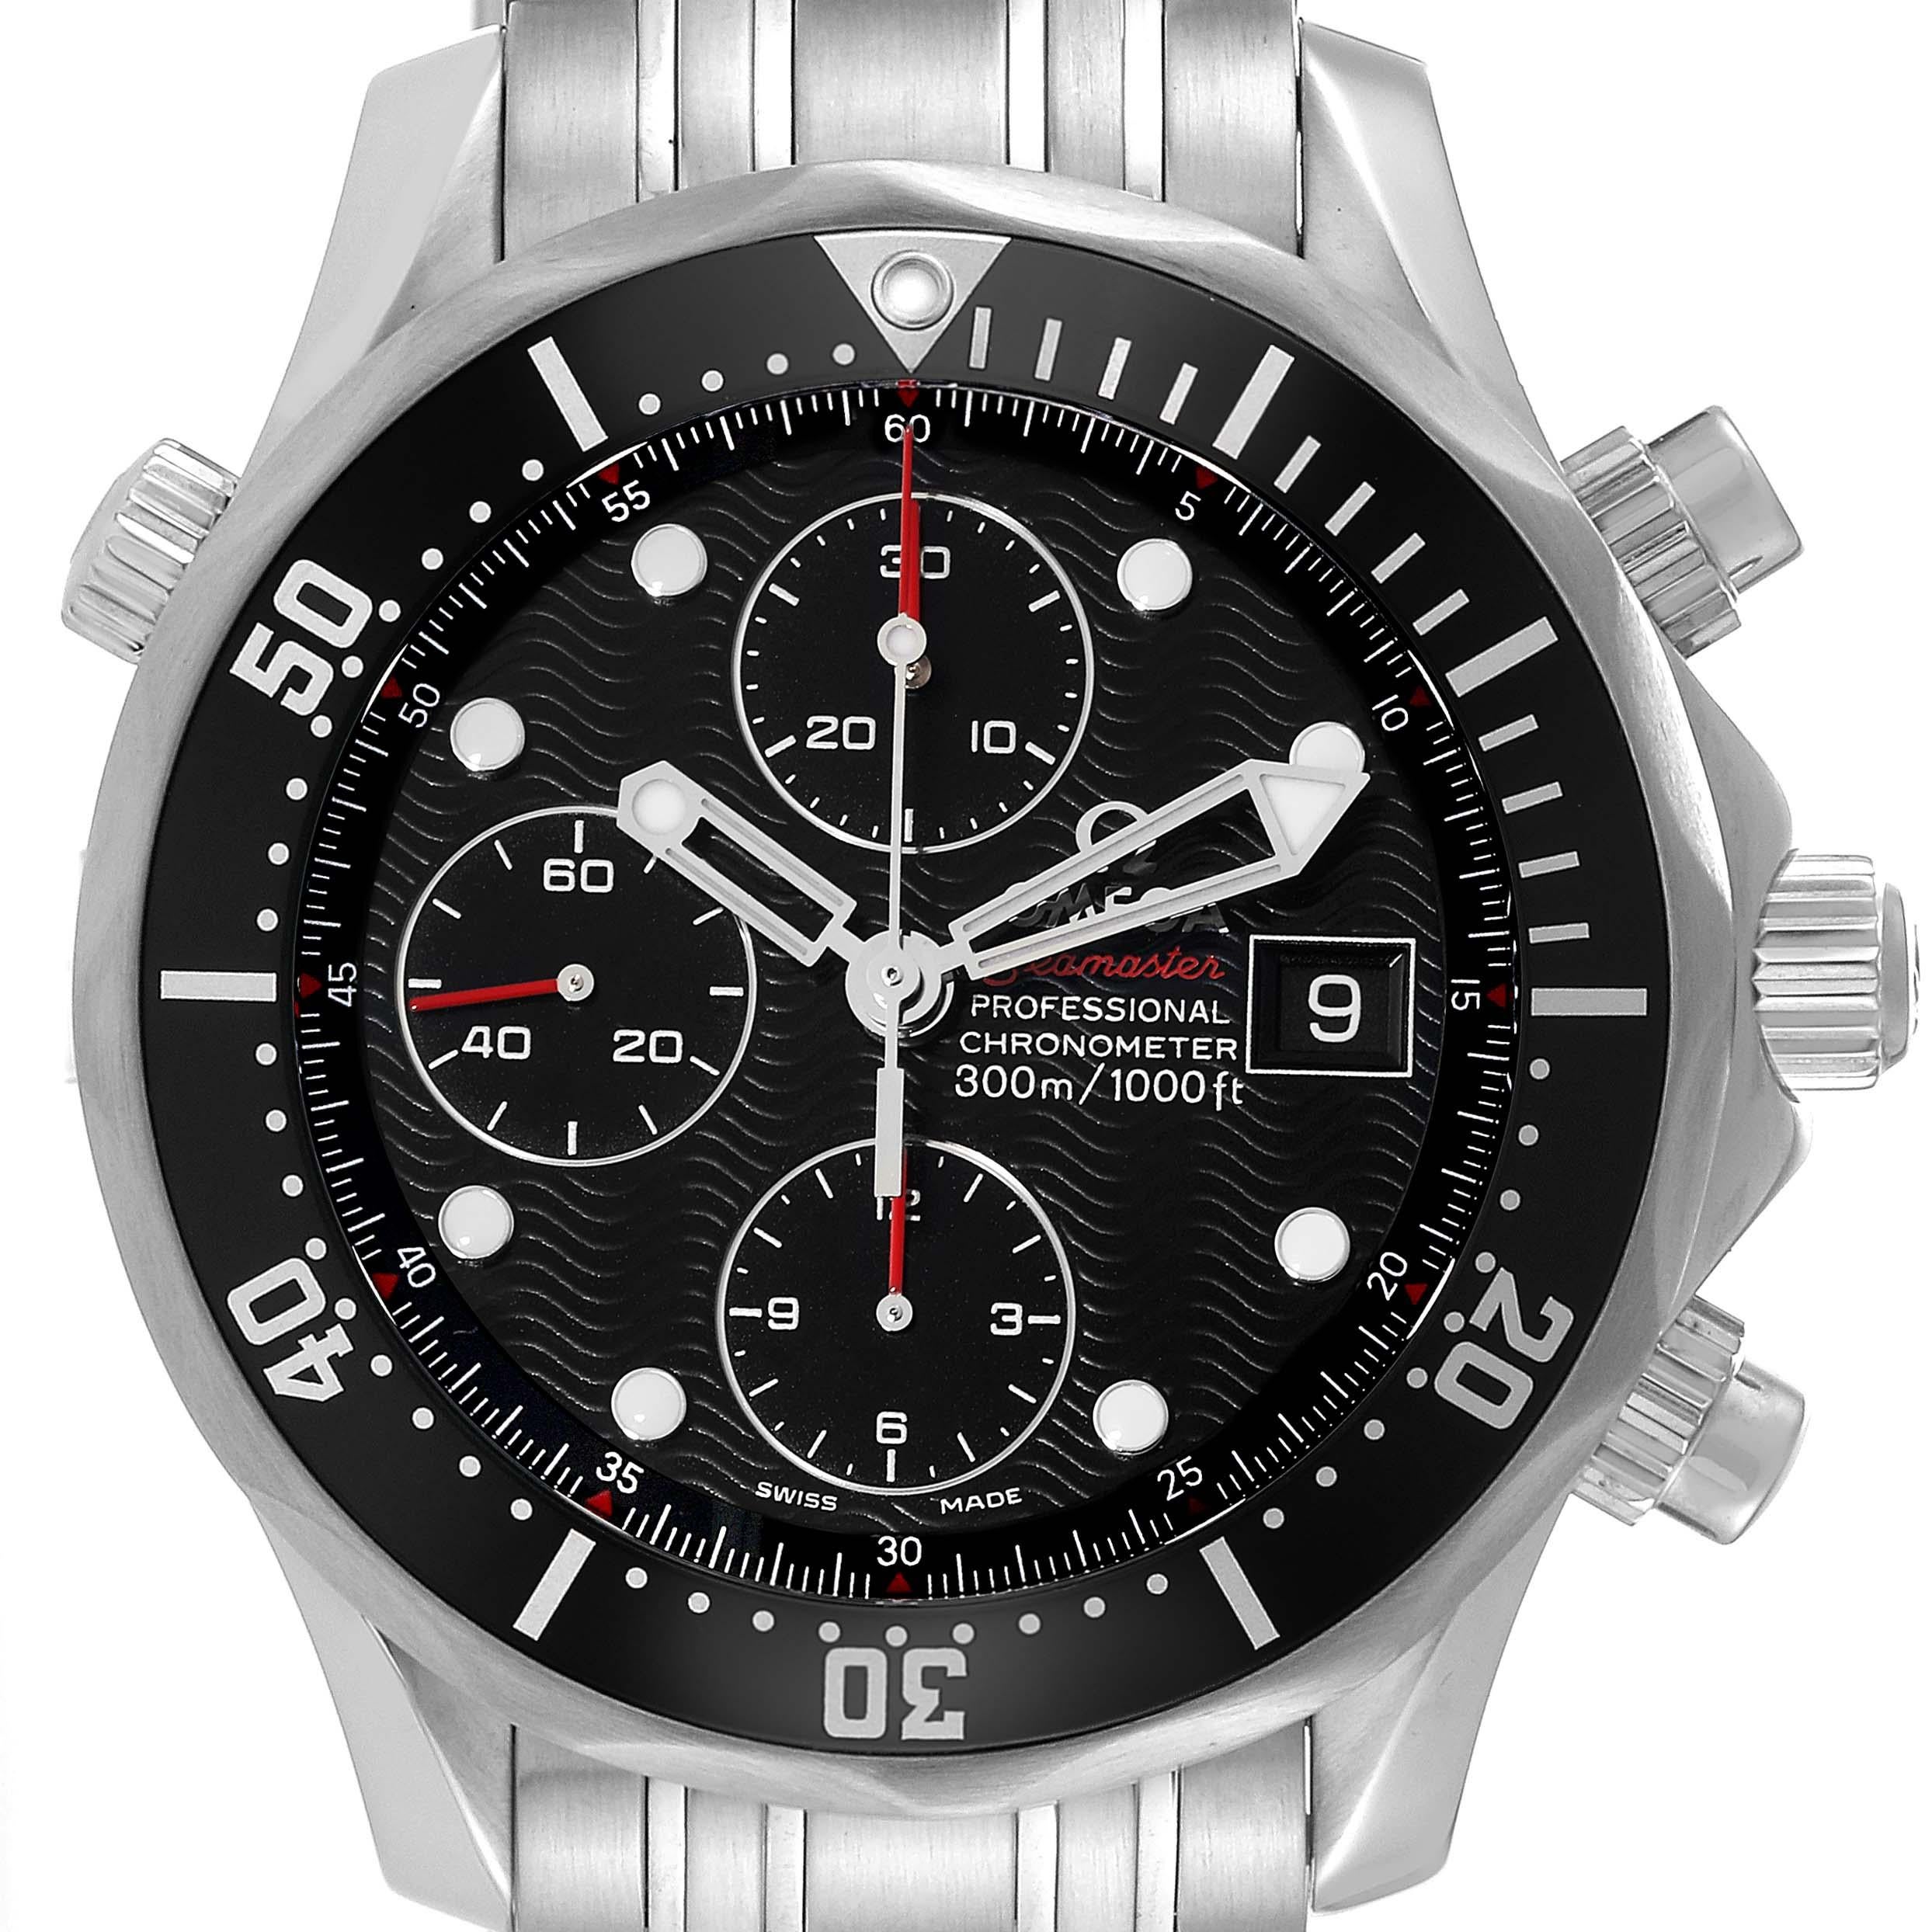 Omega Seamaster Chronograph Black Dial Steel Mens Watch 213.30.42.40.01.001. Automatic self-winding chronograph movement. Stainless steel round case 41.0 mm in diameter. Black unidirectional rotating bezel. Scratch resistant sapphire crystal. Black